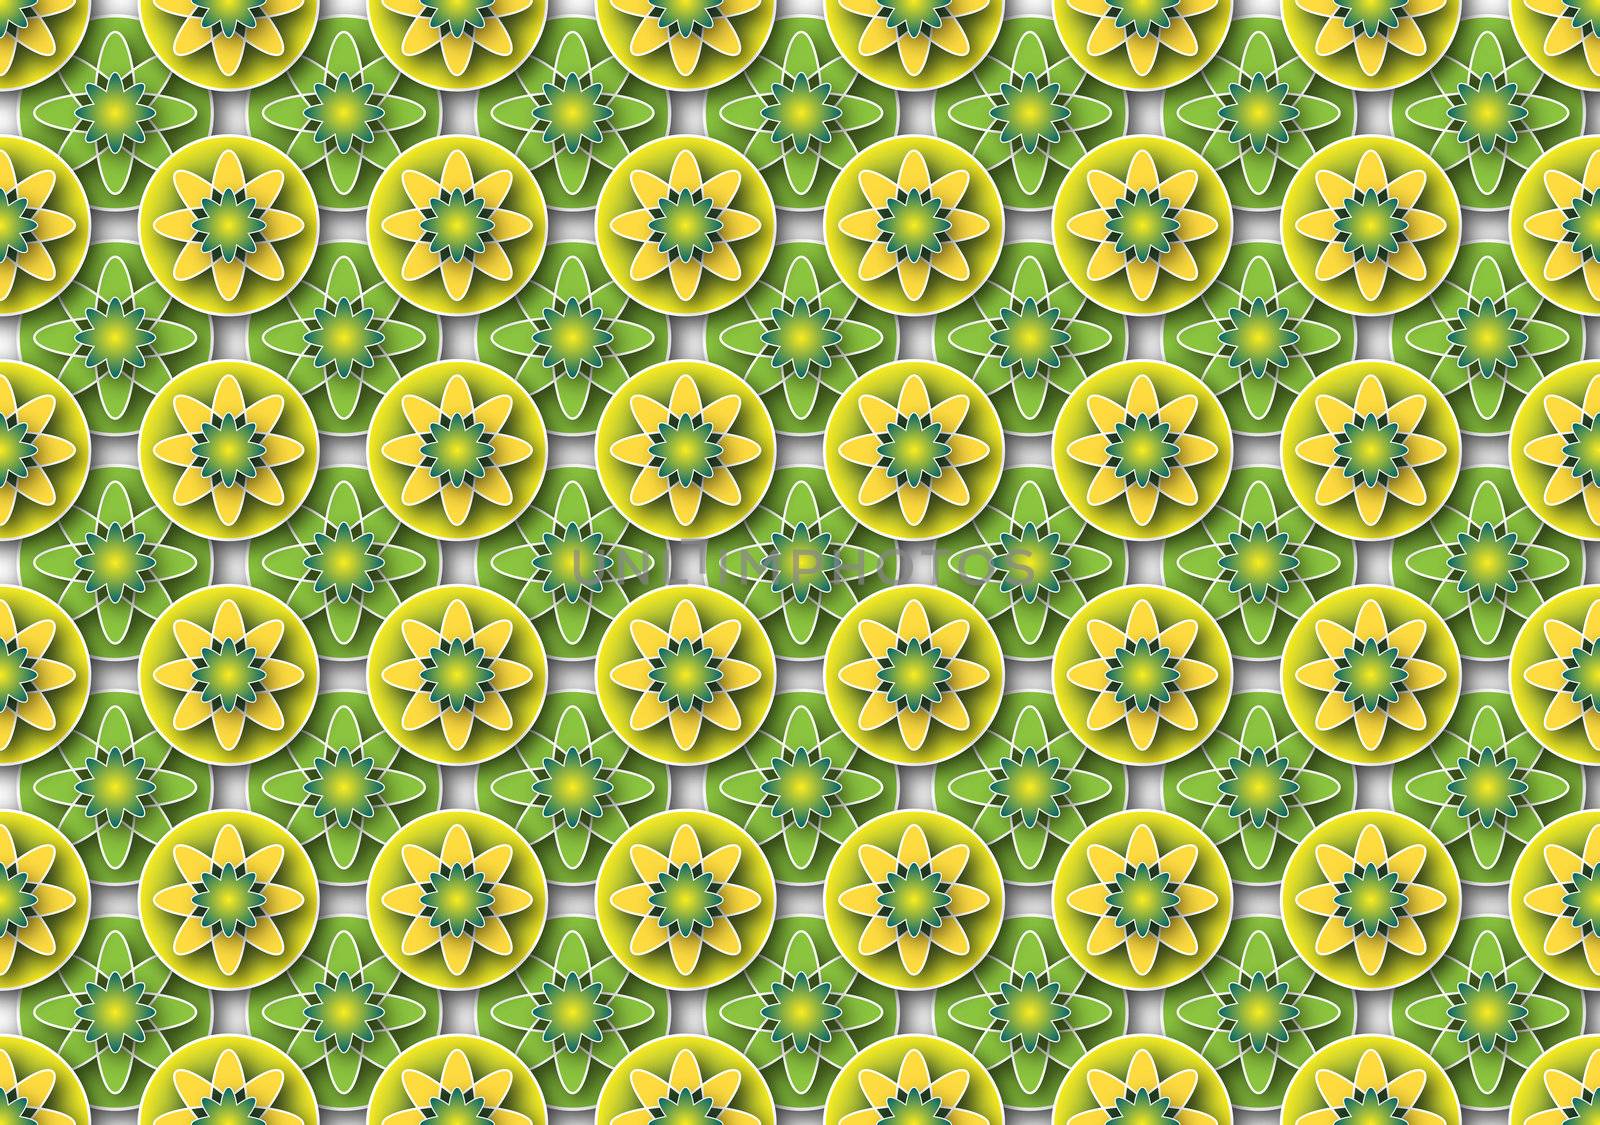 background or texture of flowers regularly spaced lime color